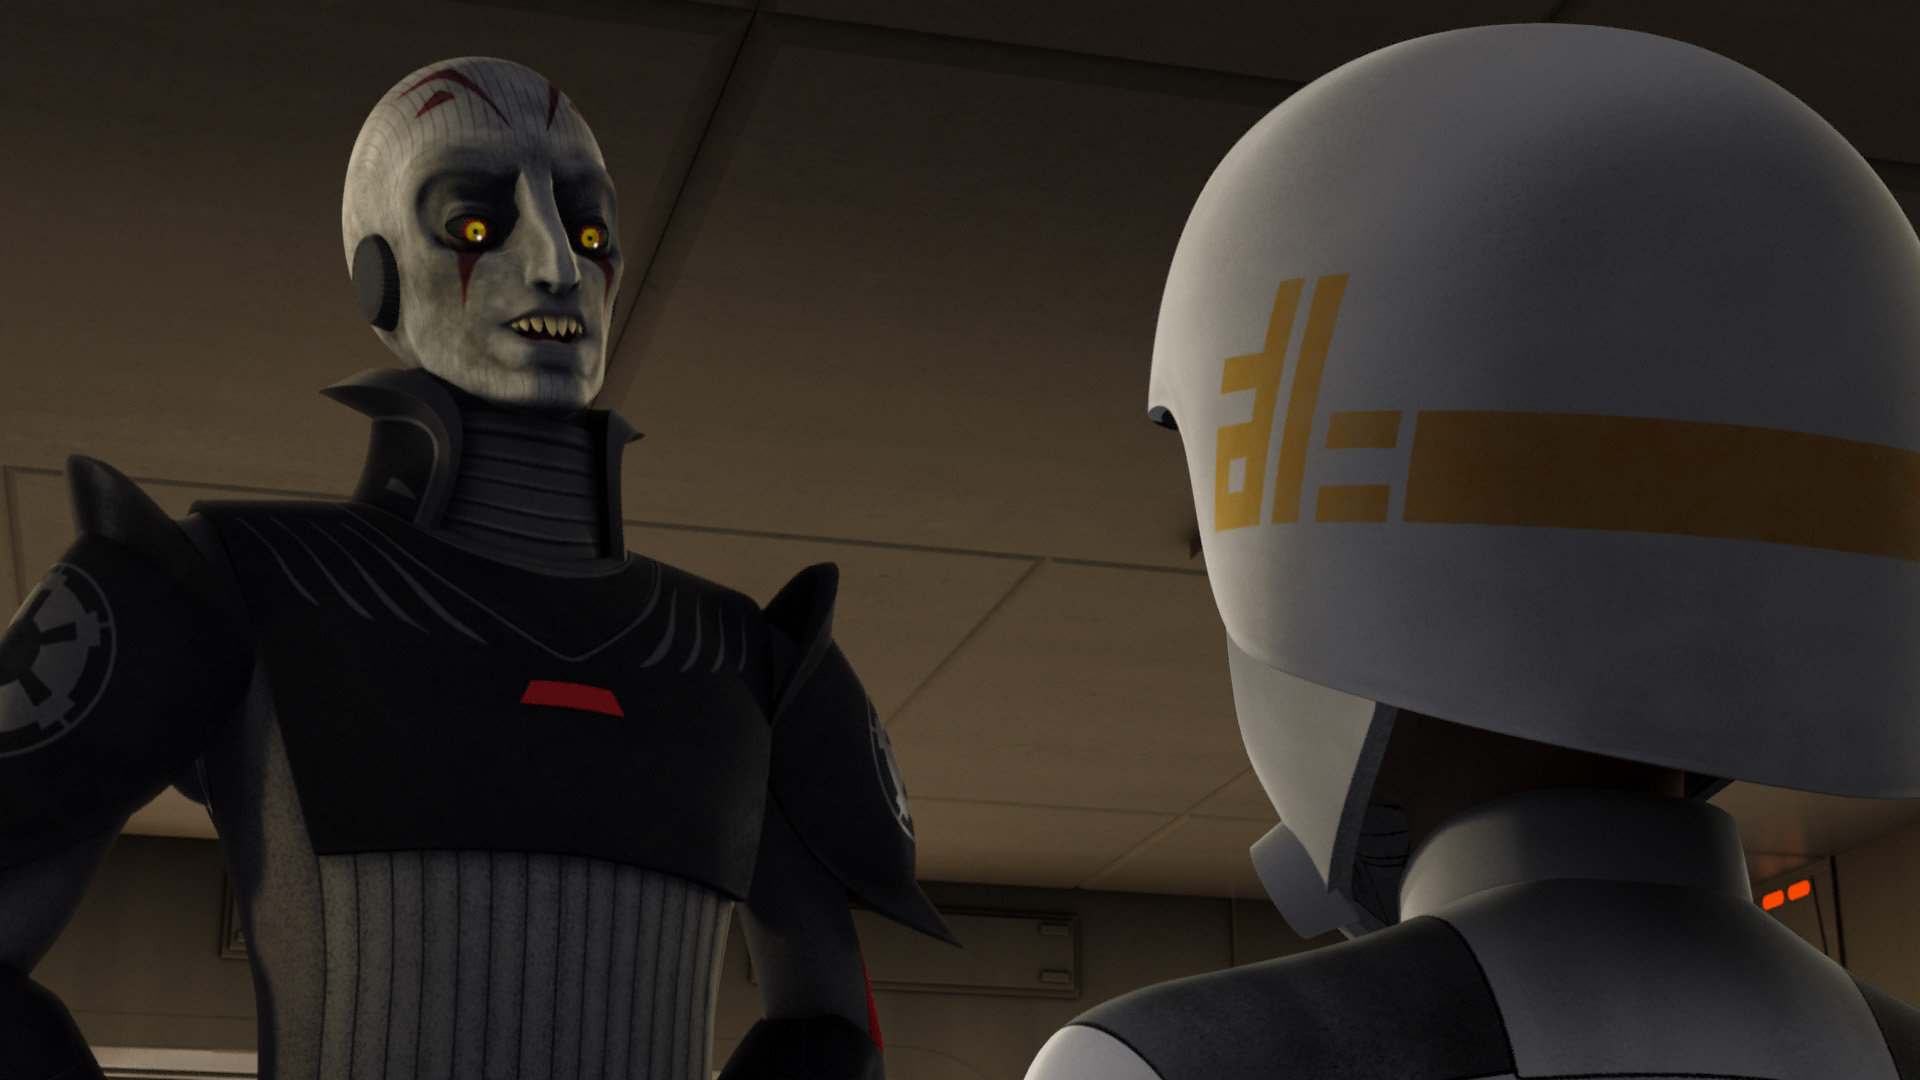 The Grand Inquisitor. Star Wars Rebels